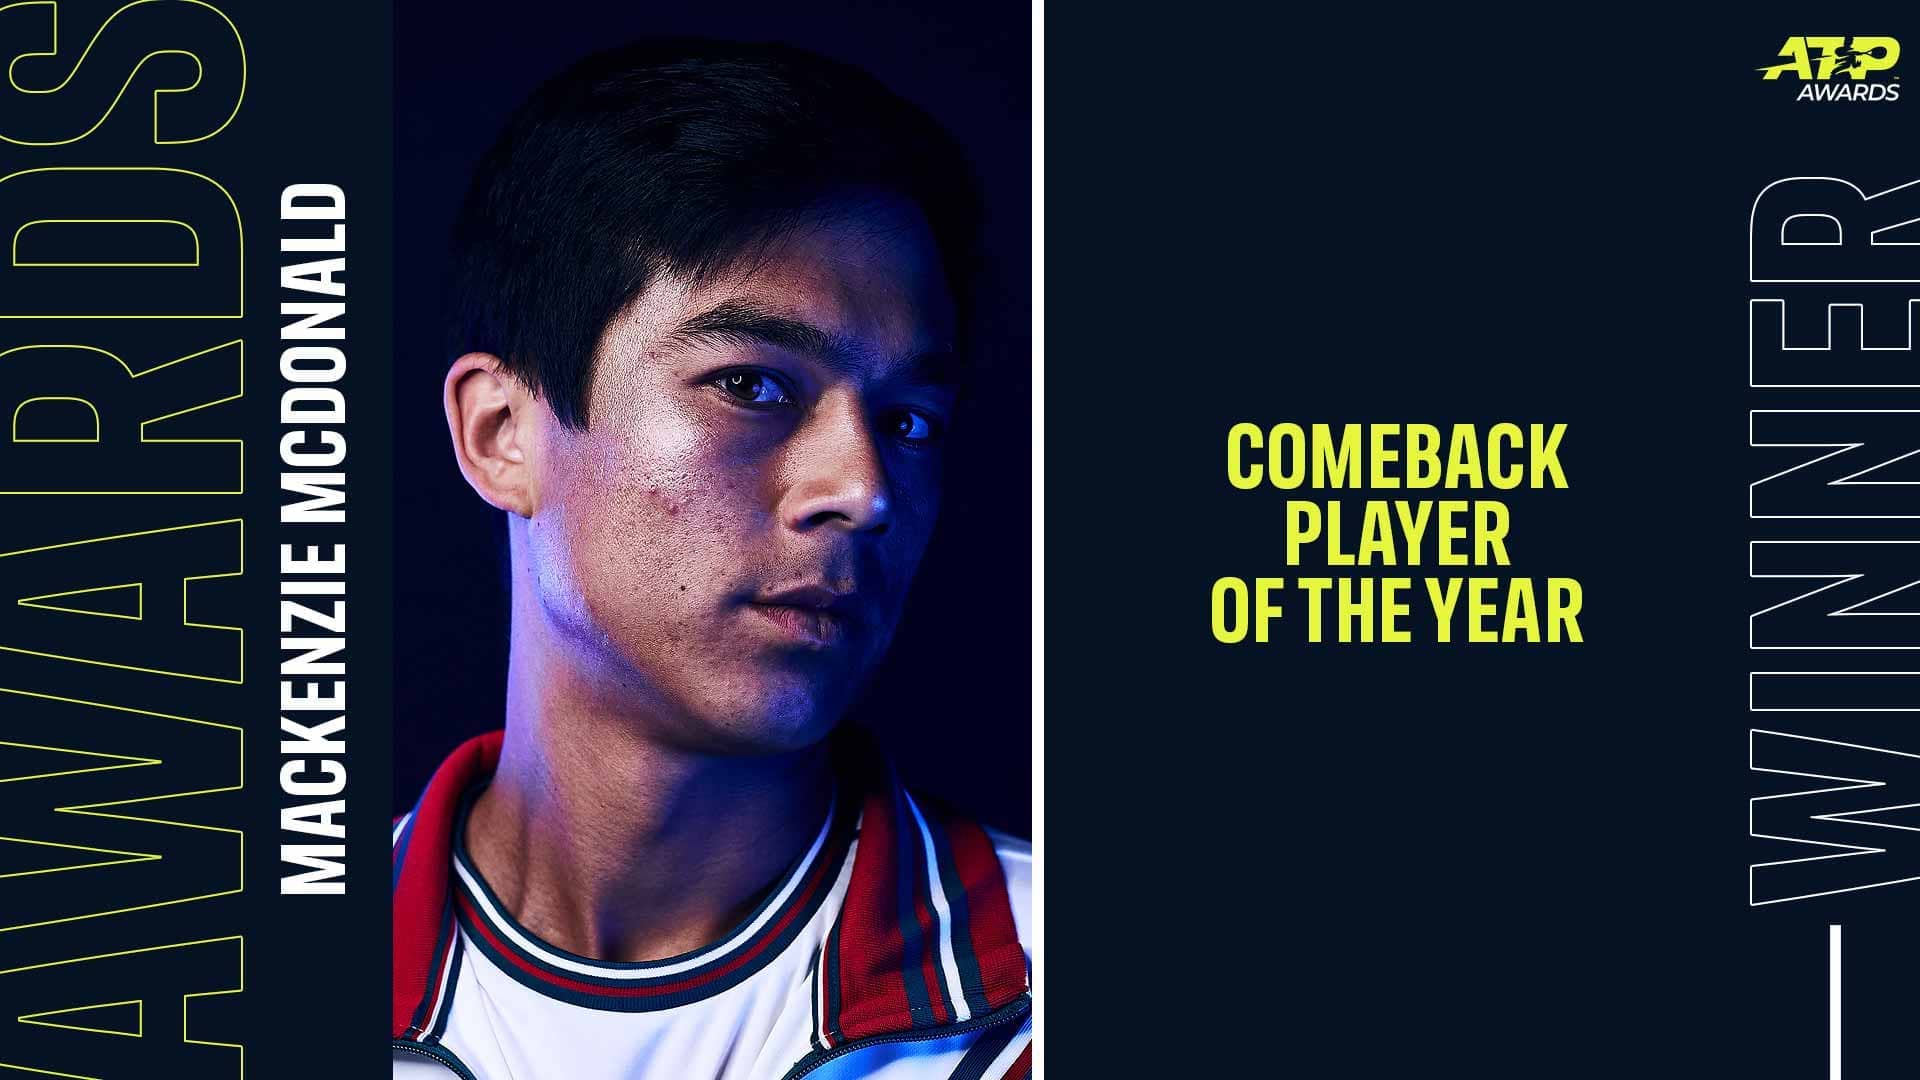 American Mackenzie McDonald has been selected by peers as the Comeback Player of the Year in the 2021 ATP Awards. 